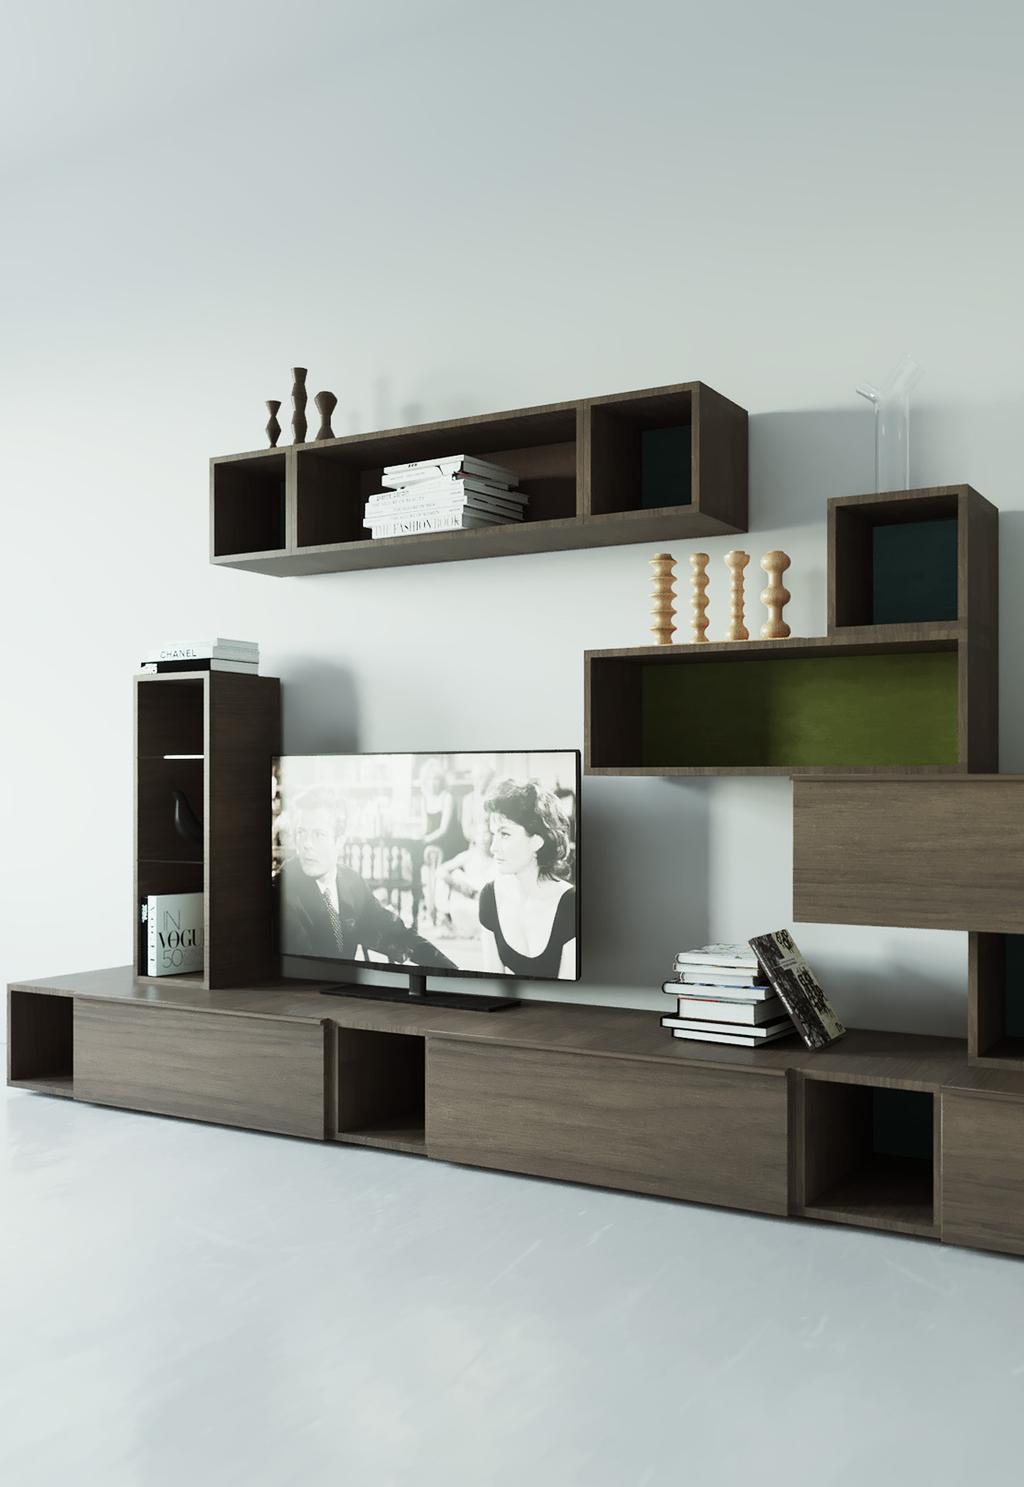 SWING TV WALL UNIT Wall units equipped for living rooms or TV cabinets made to measure